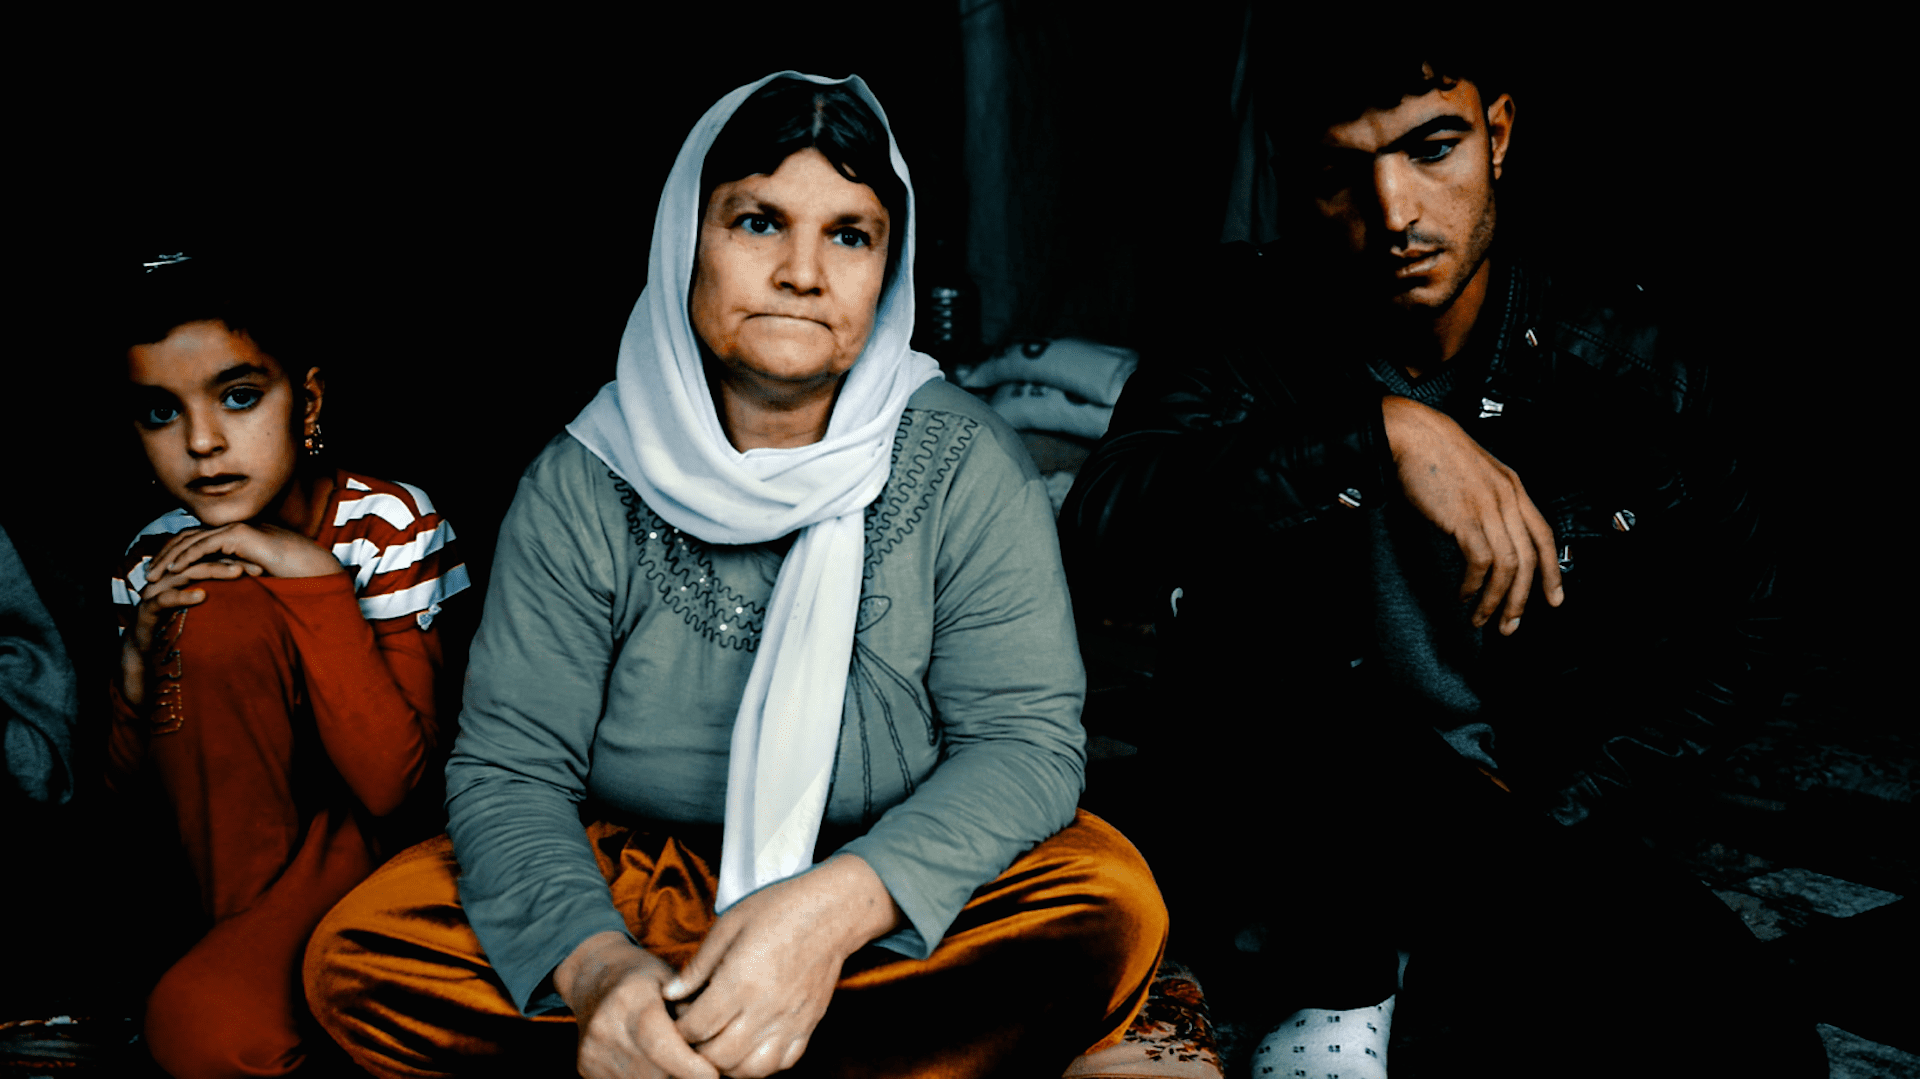 After ISIS overruns the Yazidi heartlands in northwestern Iraq they immediately demand that all Yazidis either convert to Islam or face death. The male members of the Chatto family, who are from the town of Tel Uzeir, refuse and their fate is sealed.